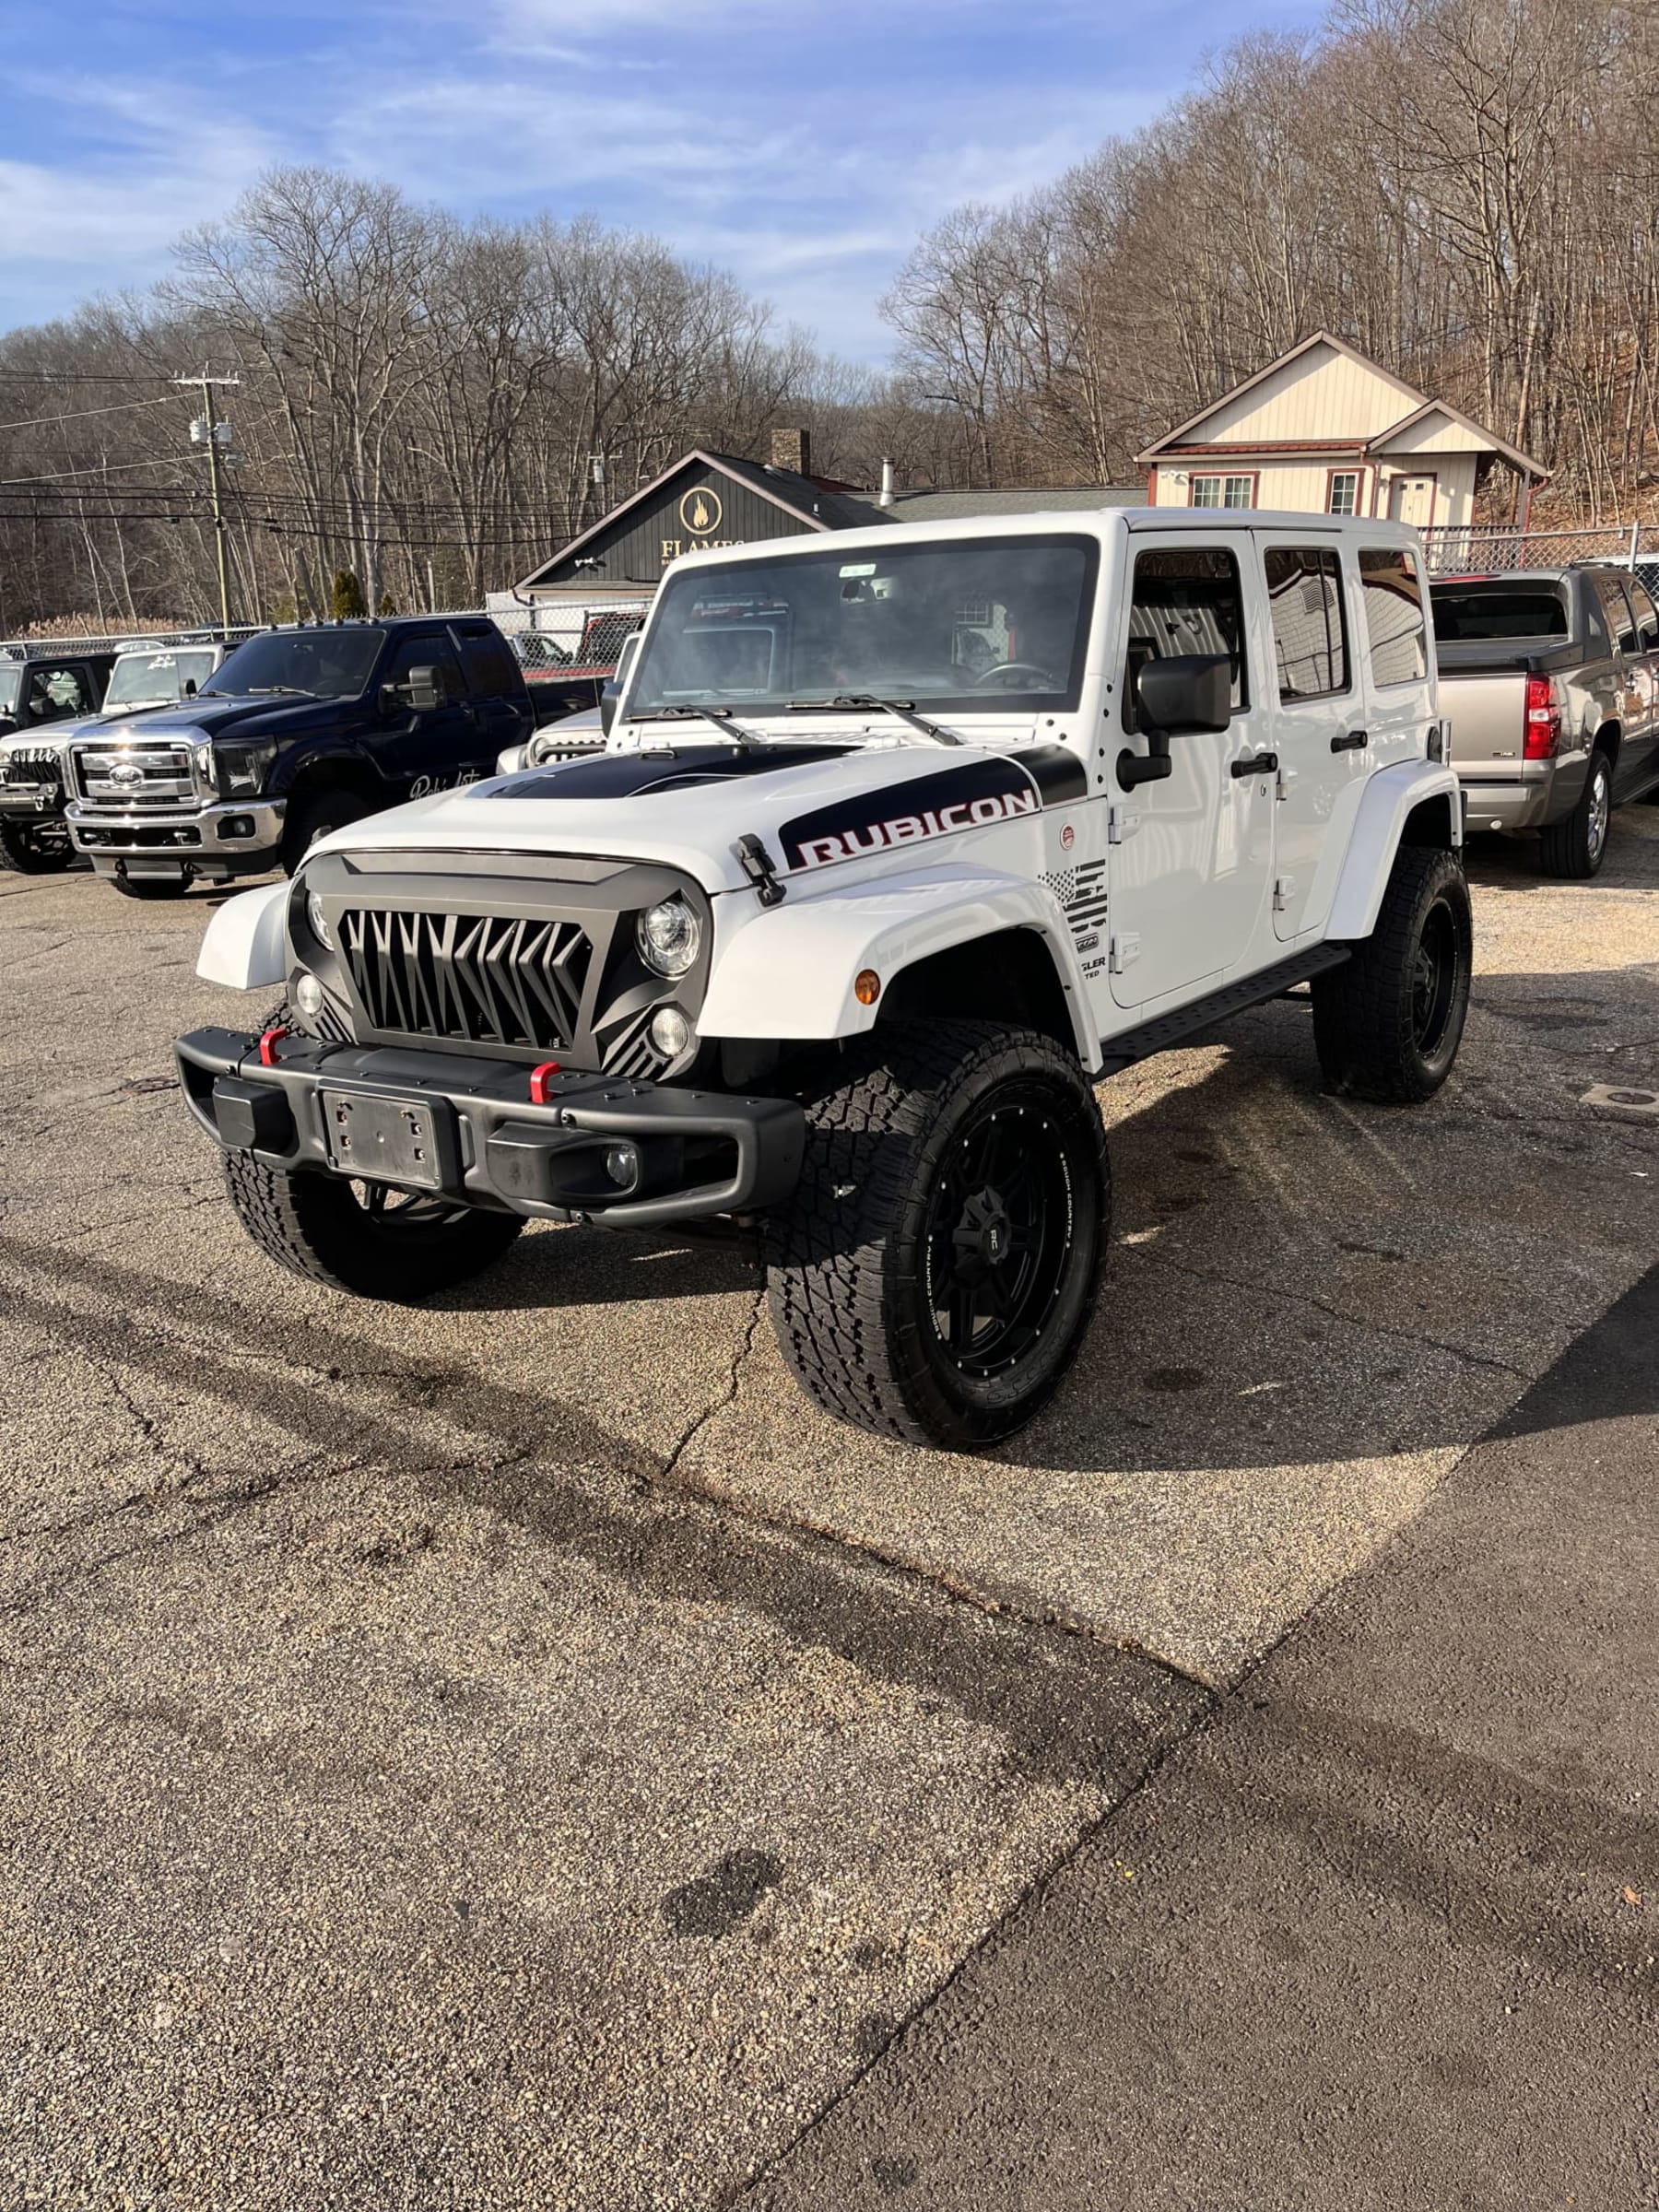 2017 Jeep unlimited wrangler rubicon recon! Only 53k miles! Leather, navigation, heated seats, lifted, wheels and tires, body colored matching hardtop and much much more! Priced WELL BELOW retail! $35,900